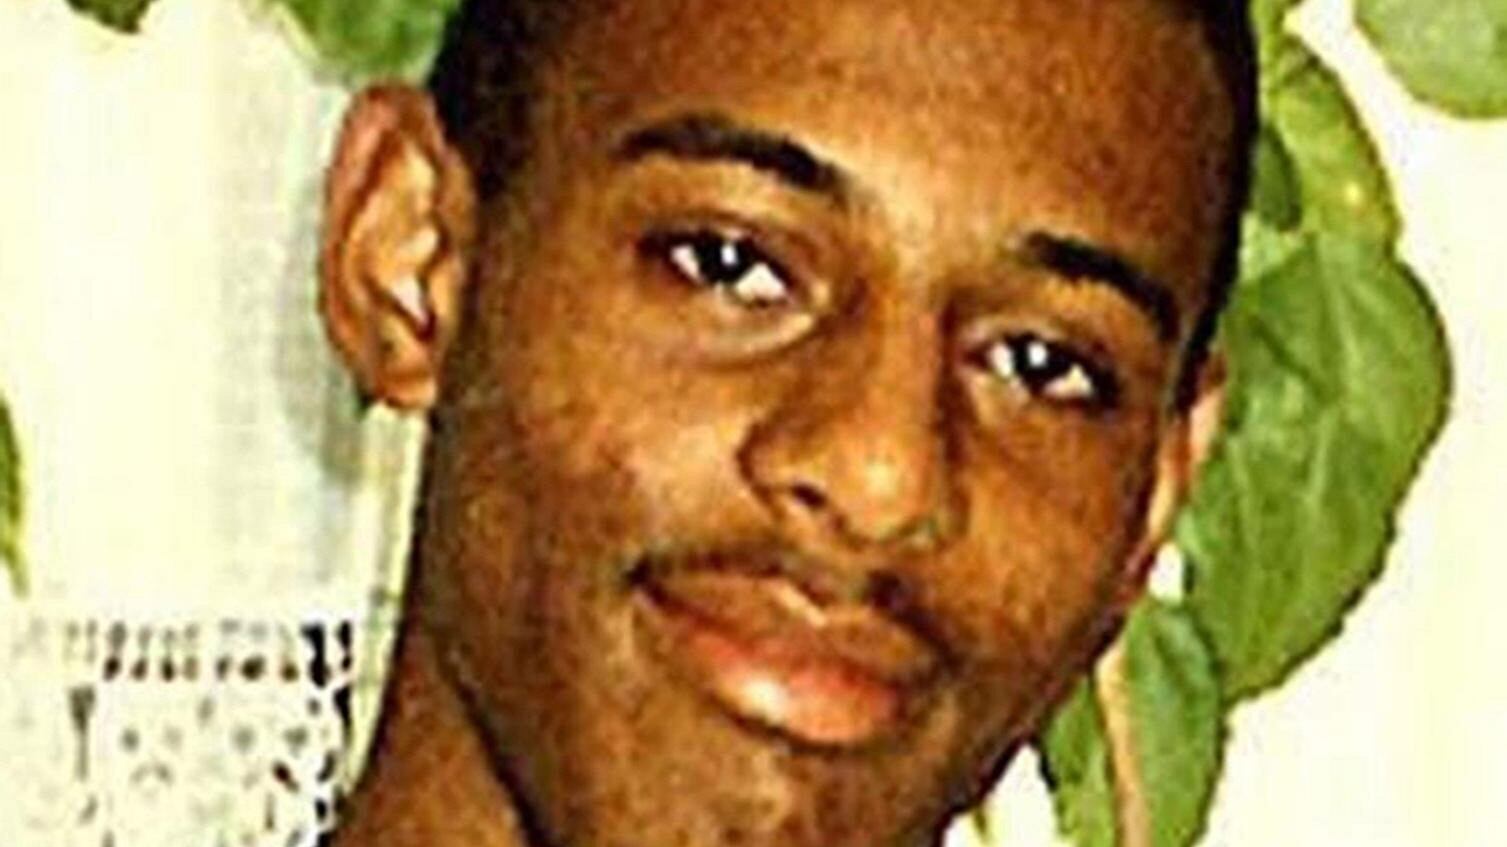 Stephen Lawrence was murdered by a gang of racists in Eltham, south-east London, in April 1993